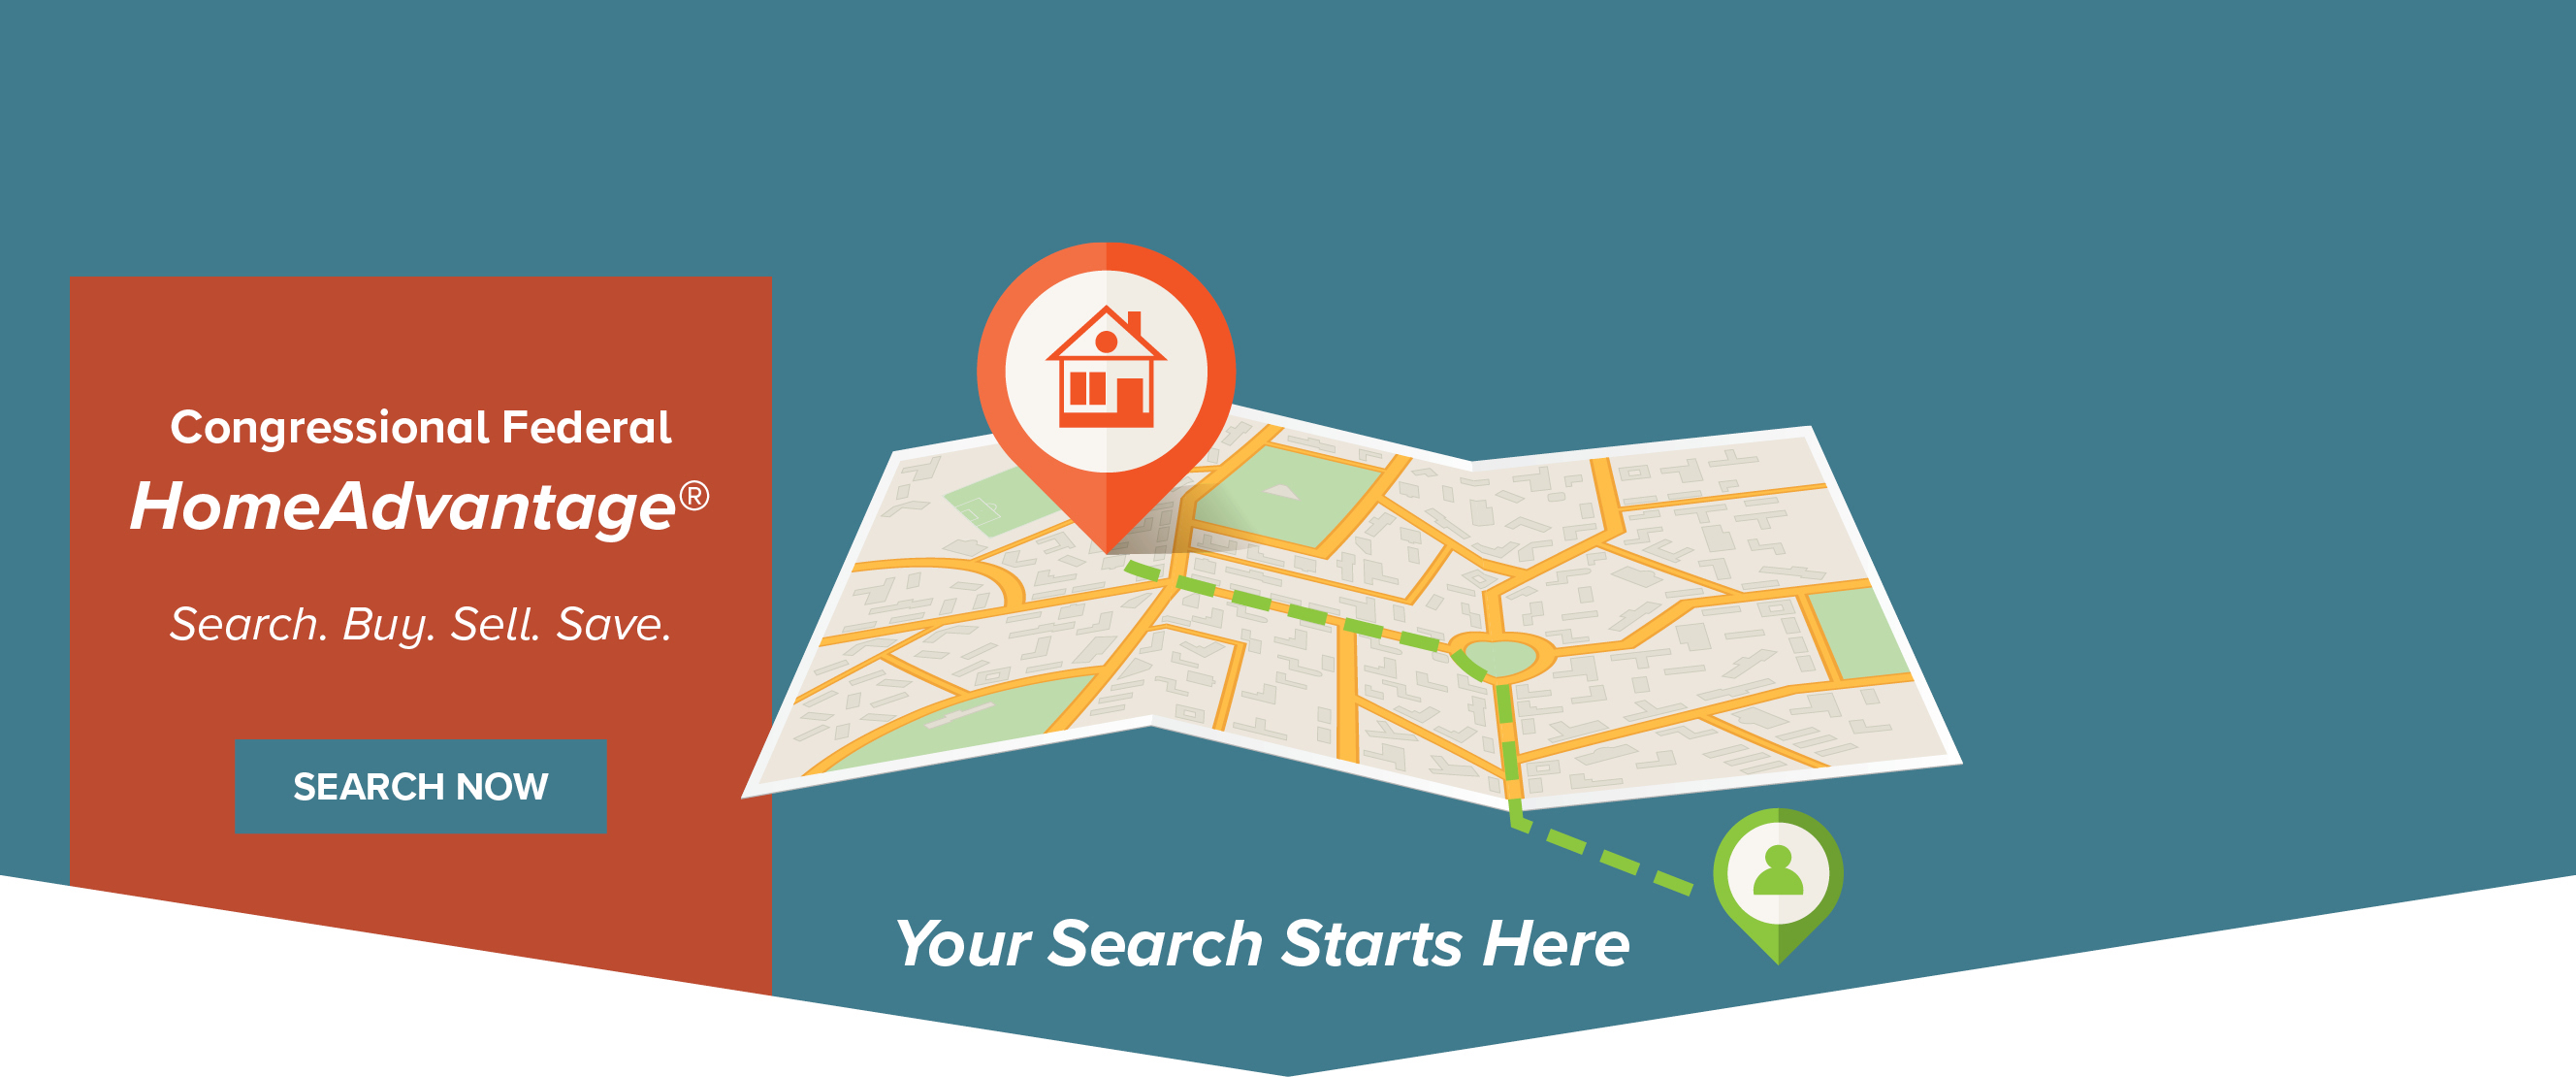 Home Advantage. Search. Buy. Sell. Save. Your Search Starts Here